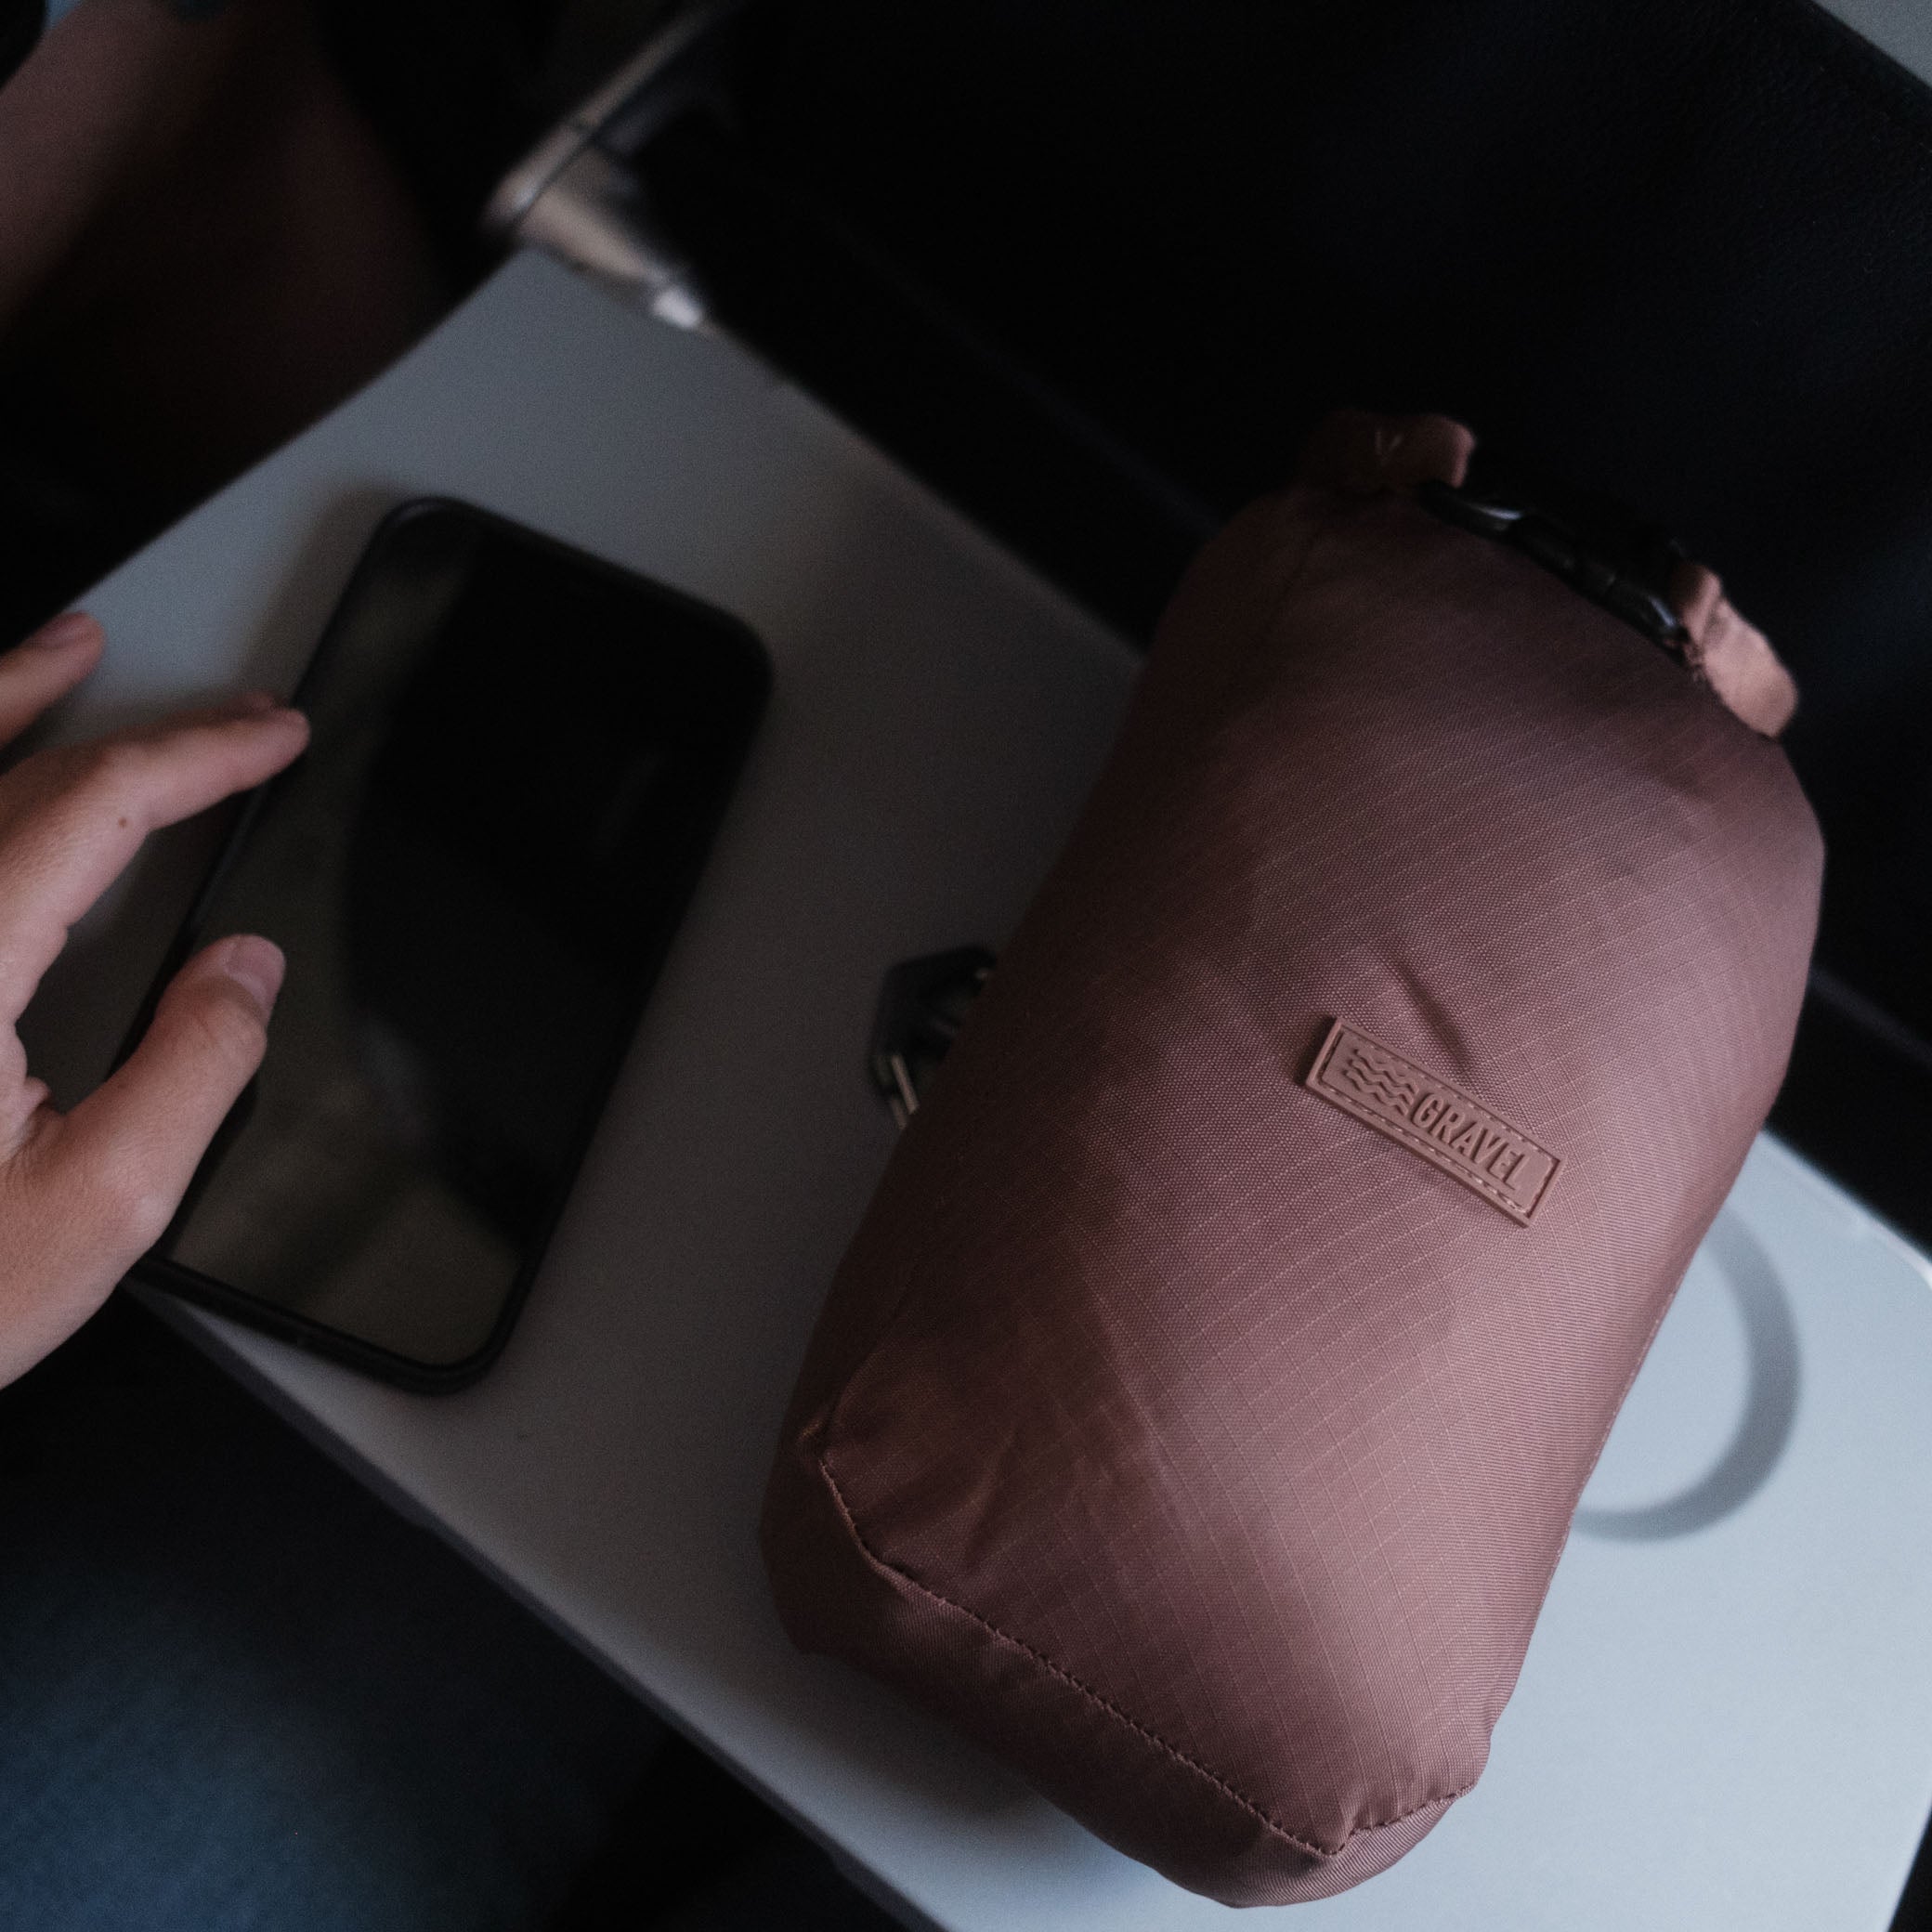 Layover™ Travel Blanket - Insulated & Packable | Quartz